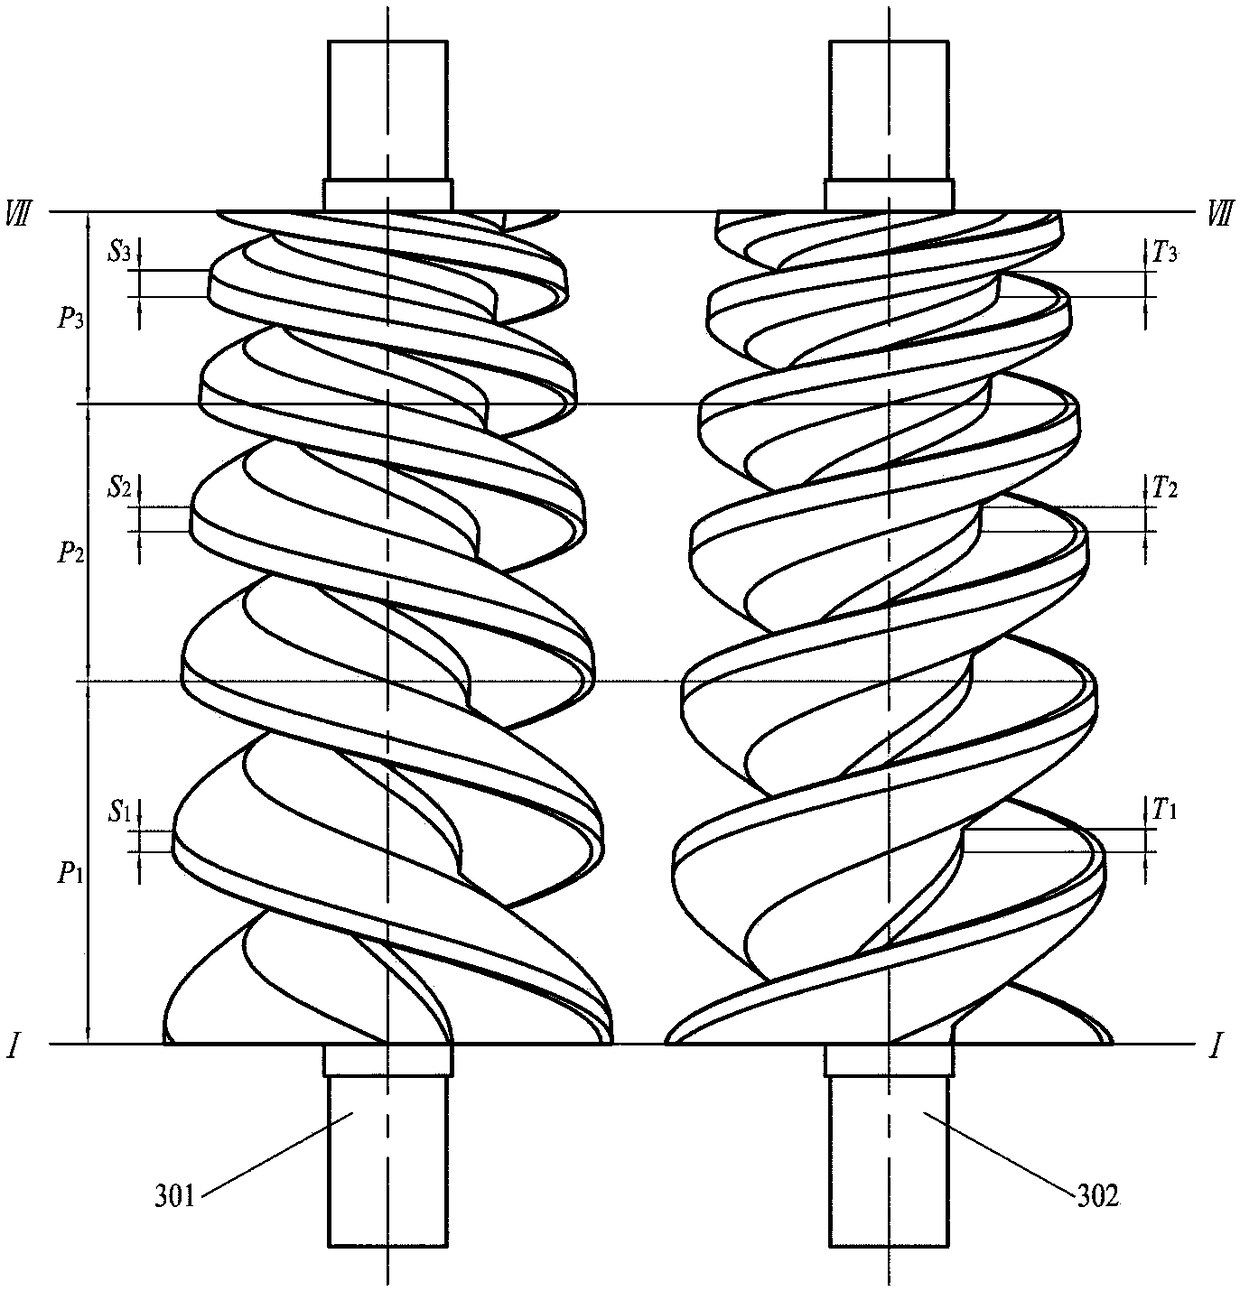 A self-balancing conical screw rotor with variable pitch